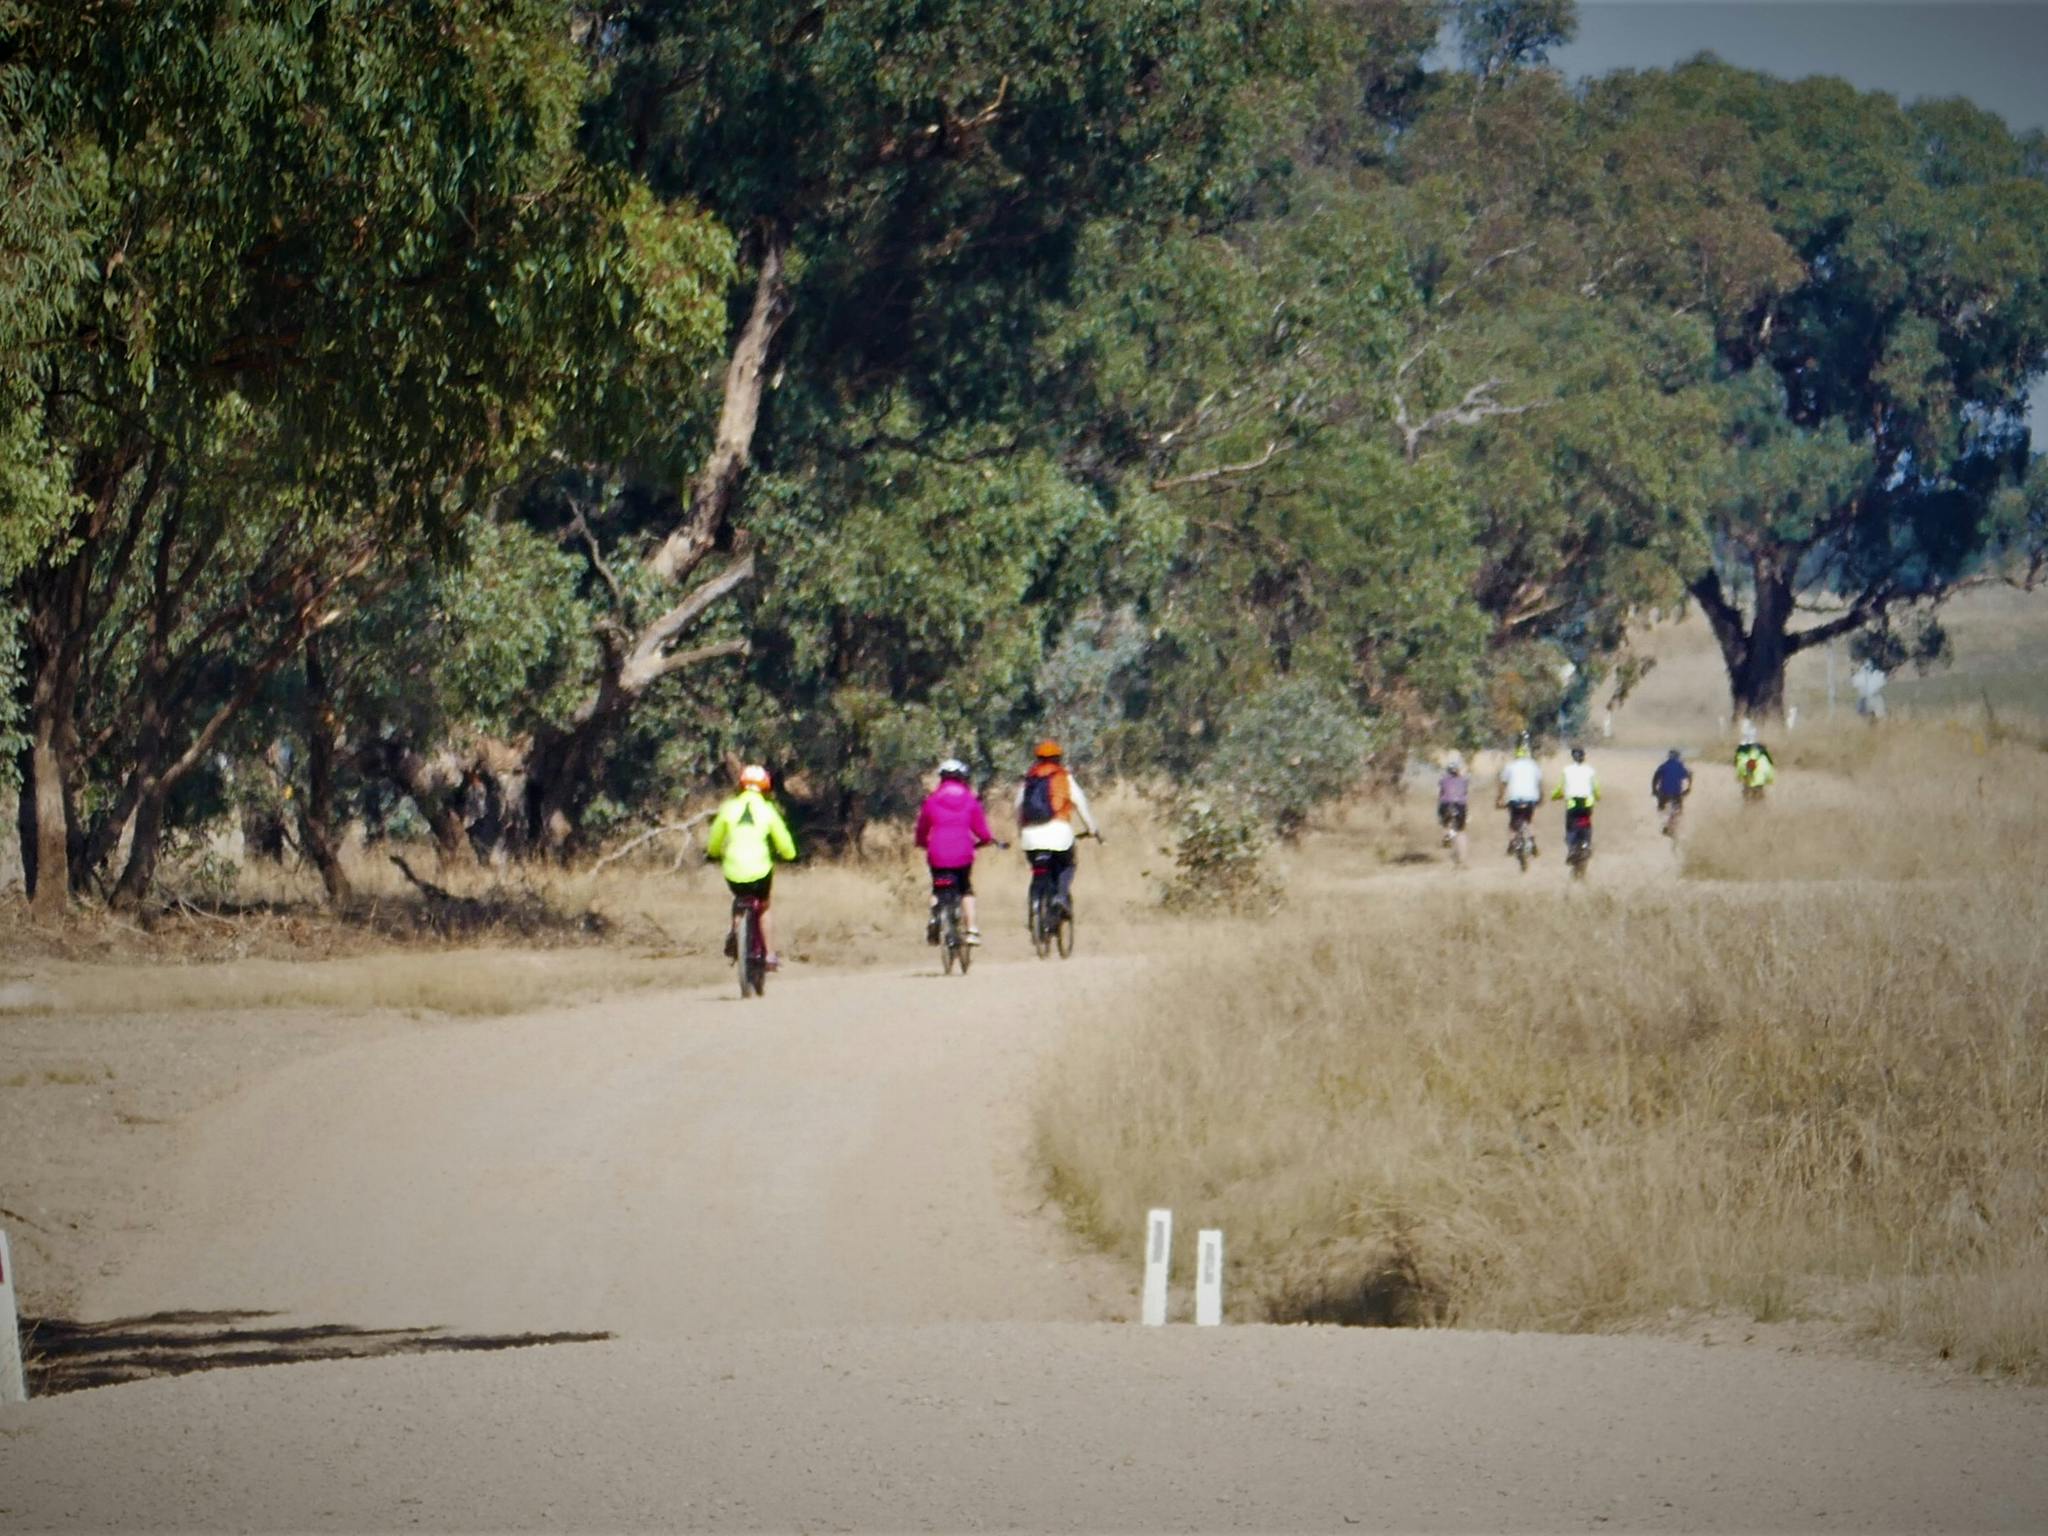 Enjoy Cycling the quiet back roads of N.N. Victoria